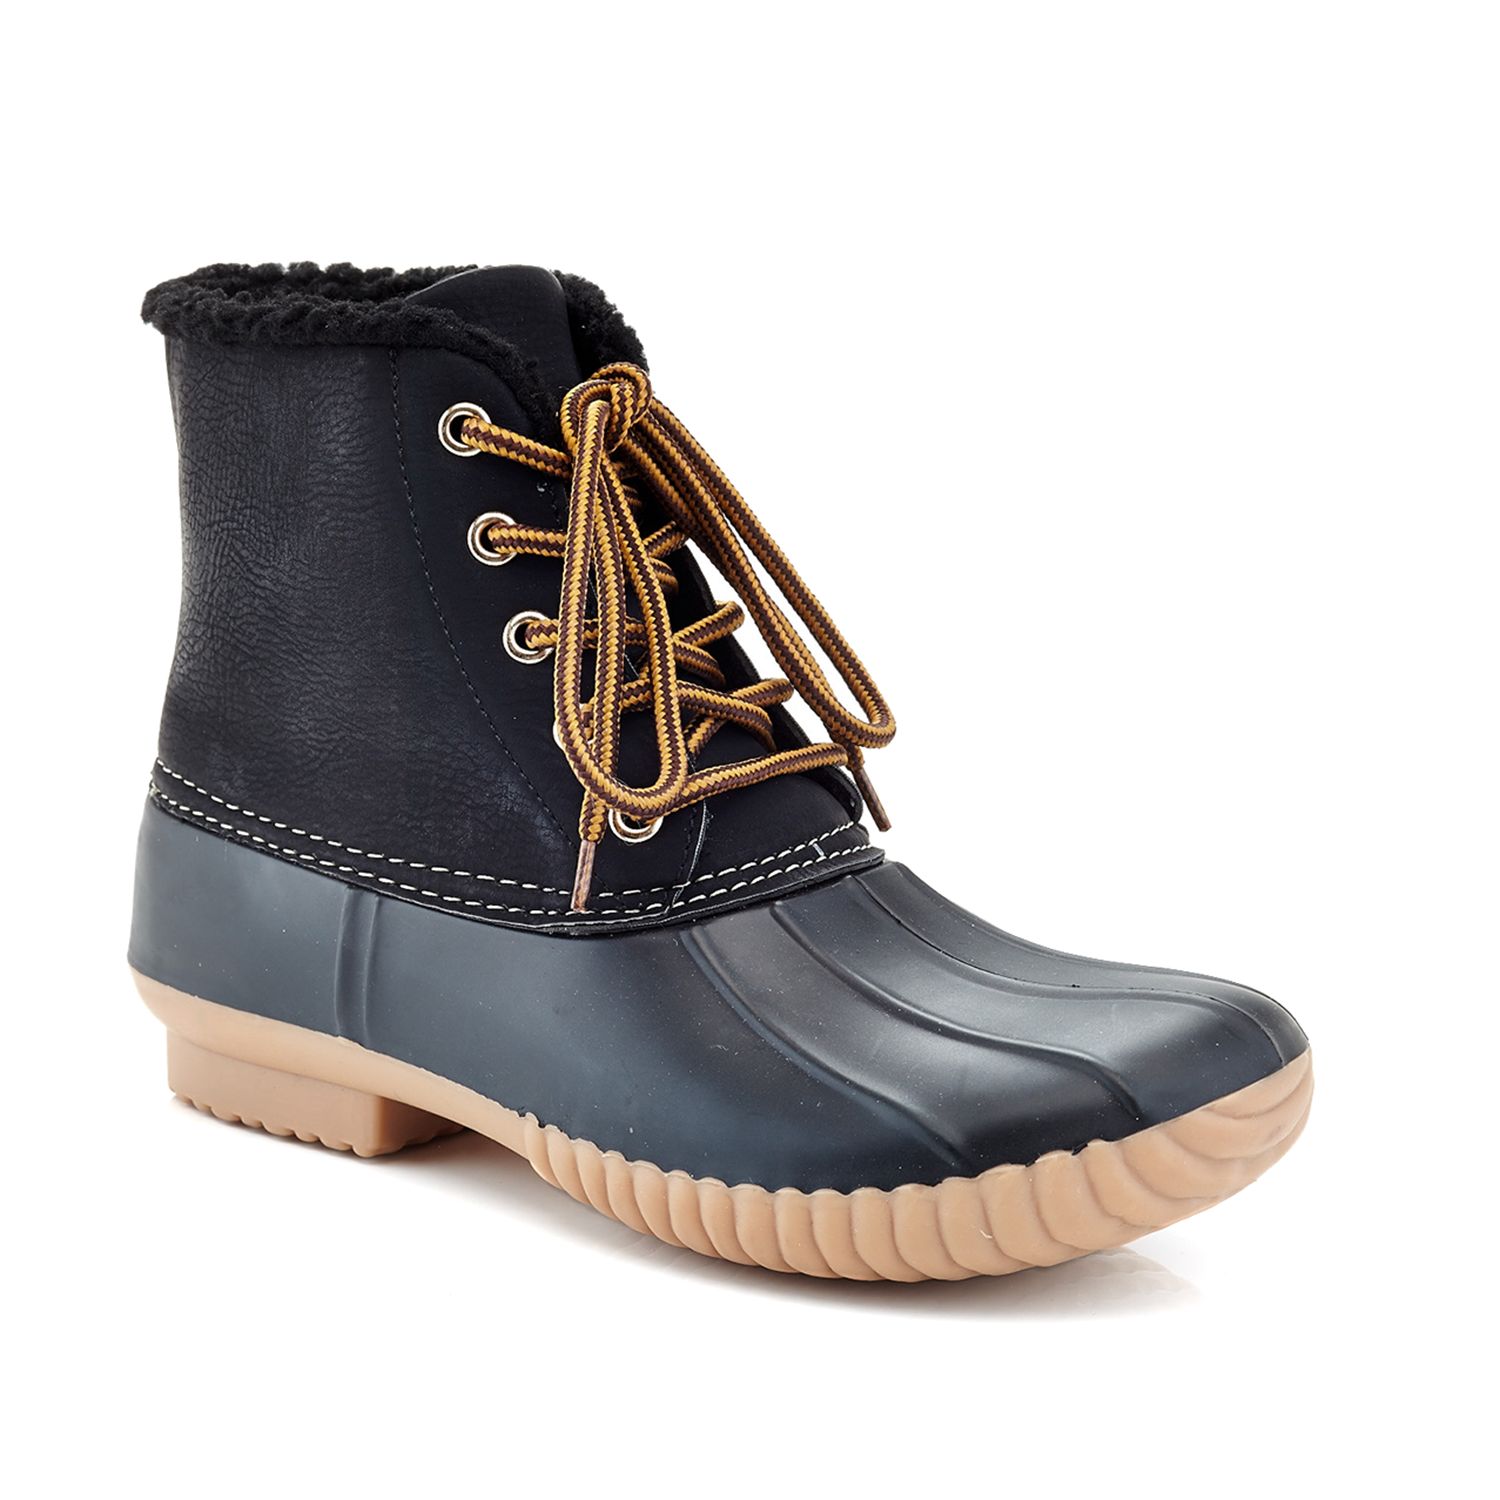 Image for Henry Ferrera Mission 72 Women's Water Resistant Duck Winter Boots at Kohl's.